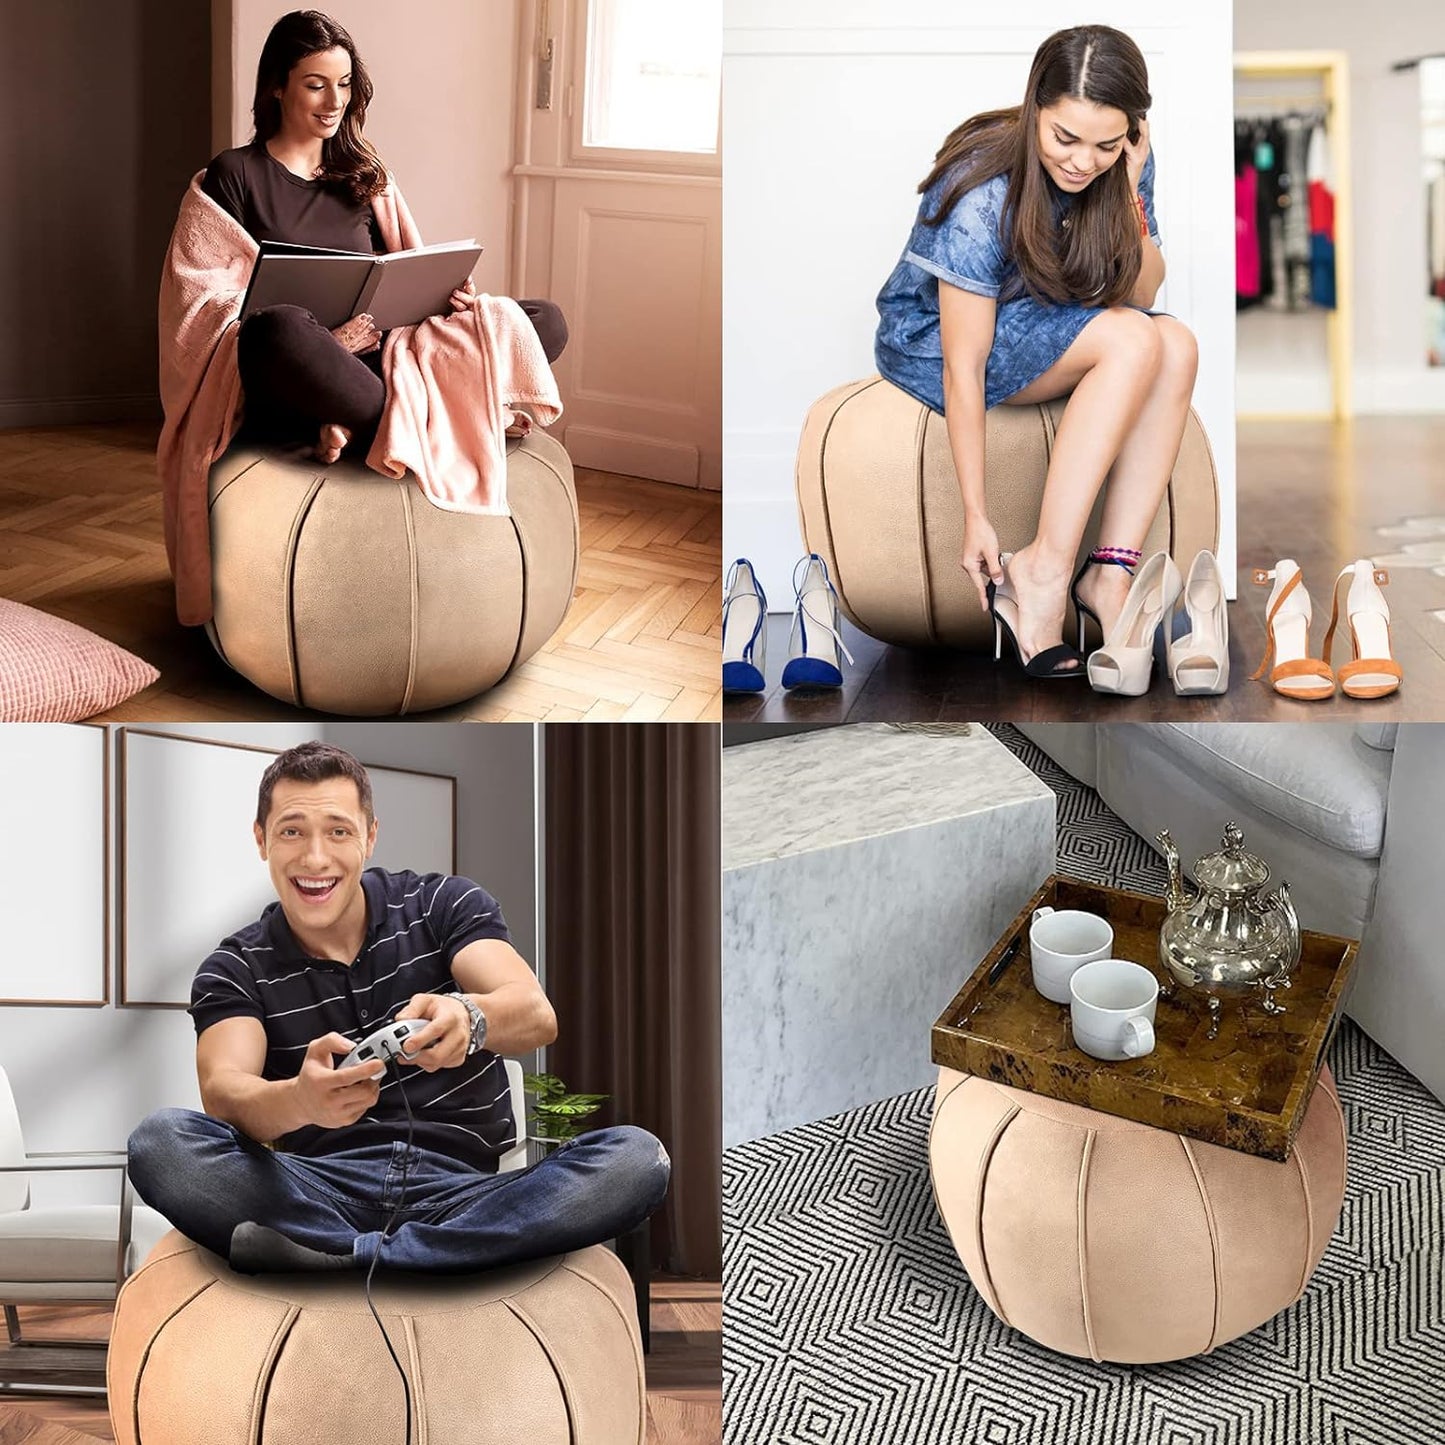 Pouf Ottoman Cover, Pouf Ottoman Foot Rest, Unstuffed Round Faux Leather Moroccan Decor, Storage Solution Footstool, Pouffe Seat for Balcony 21dia Yellow Brown, Poufs for Lving Room Gifts for Women